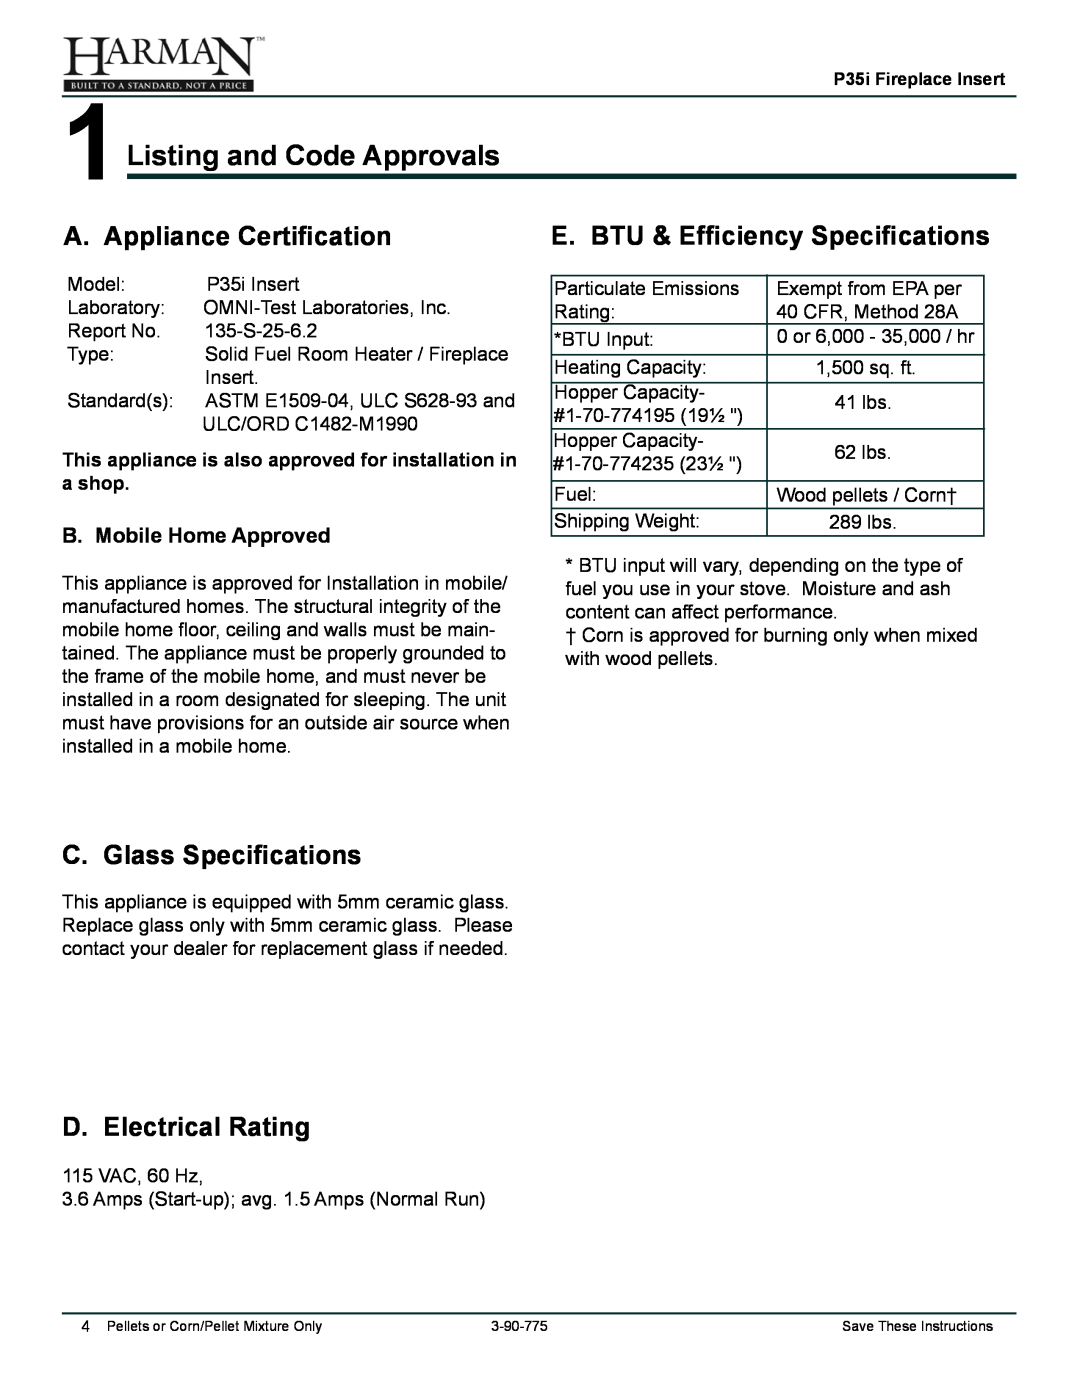 Harman Stove Company P35I 1Listing and Code Approvals, A. Appliance Certification, E. BTU & Efficiency Specifications 